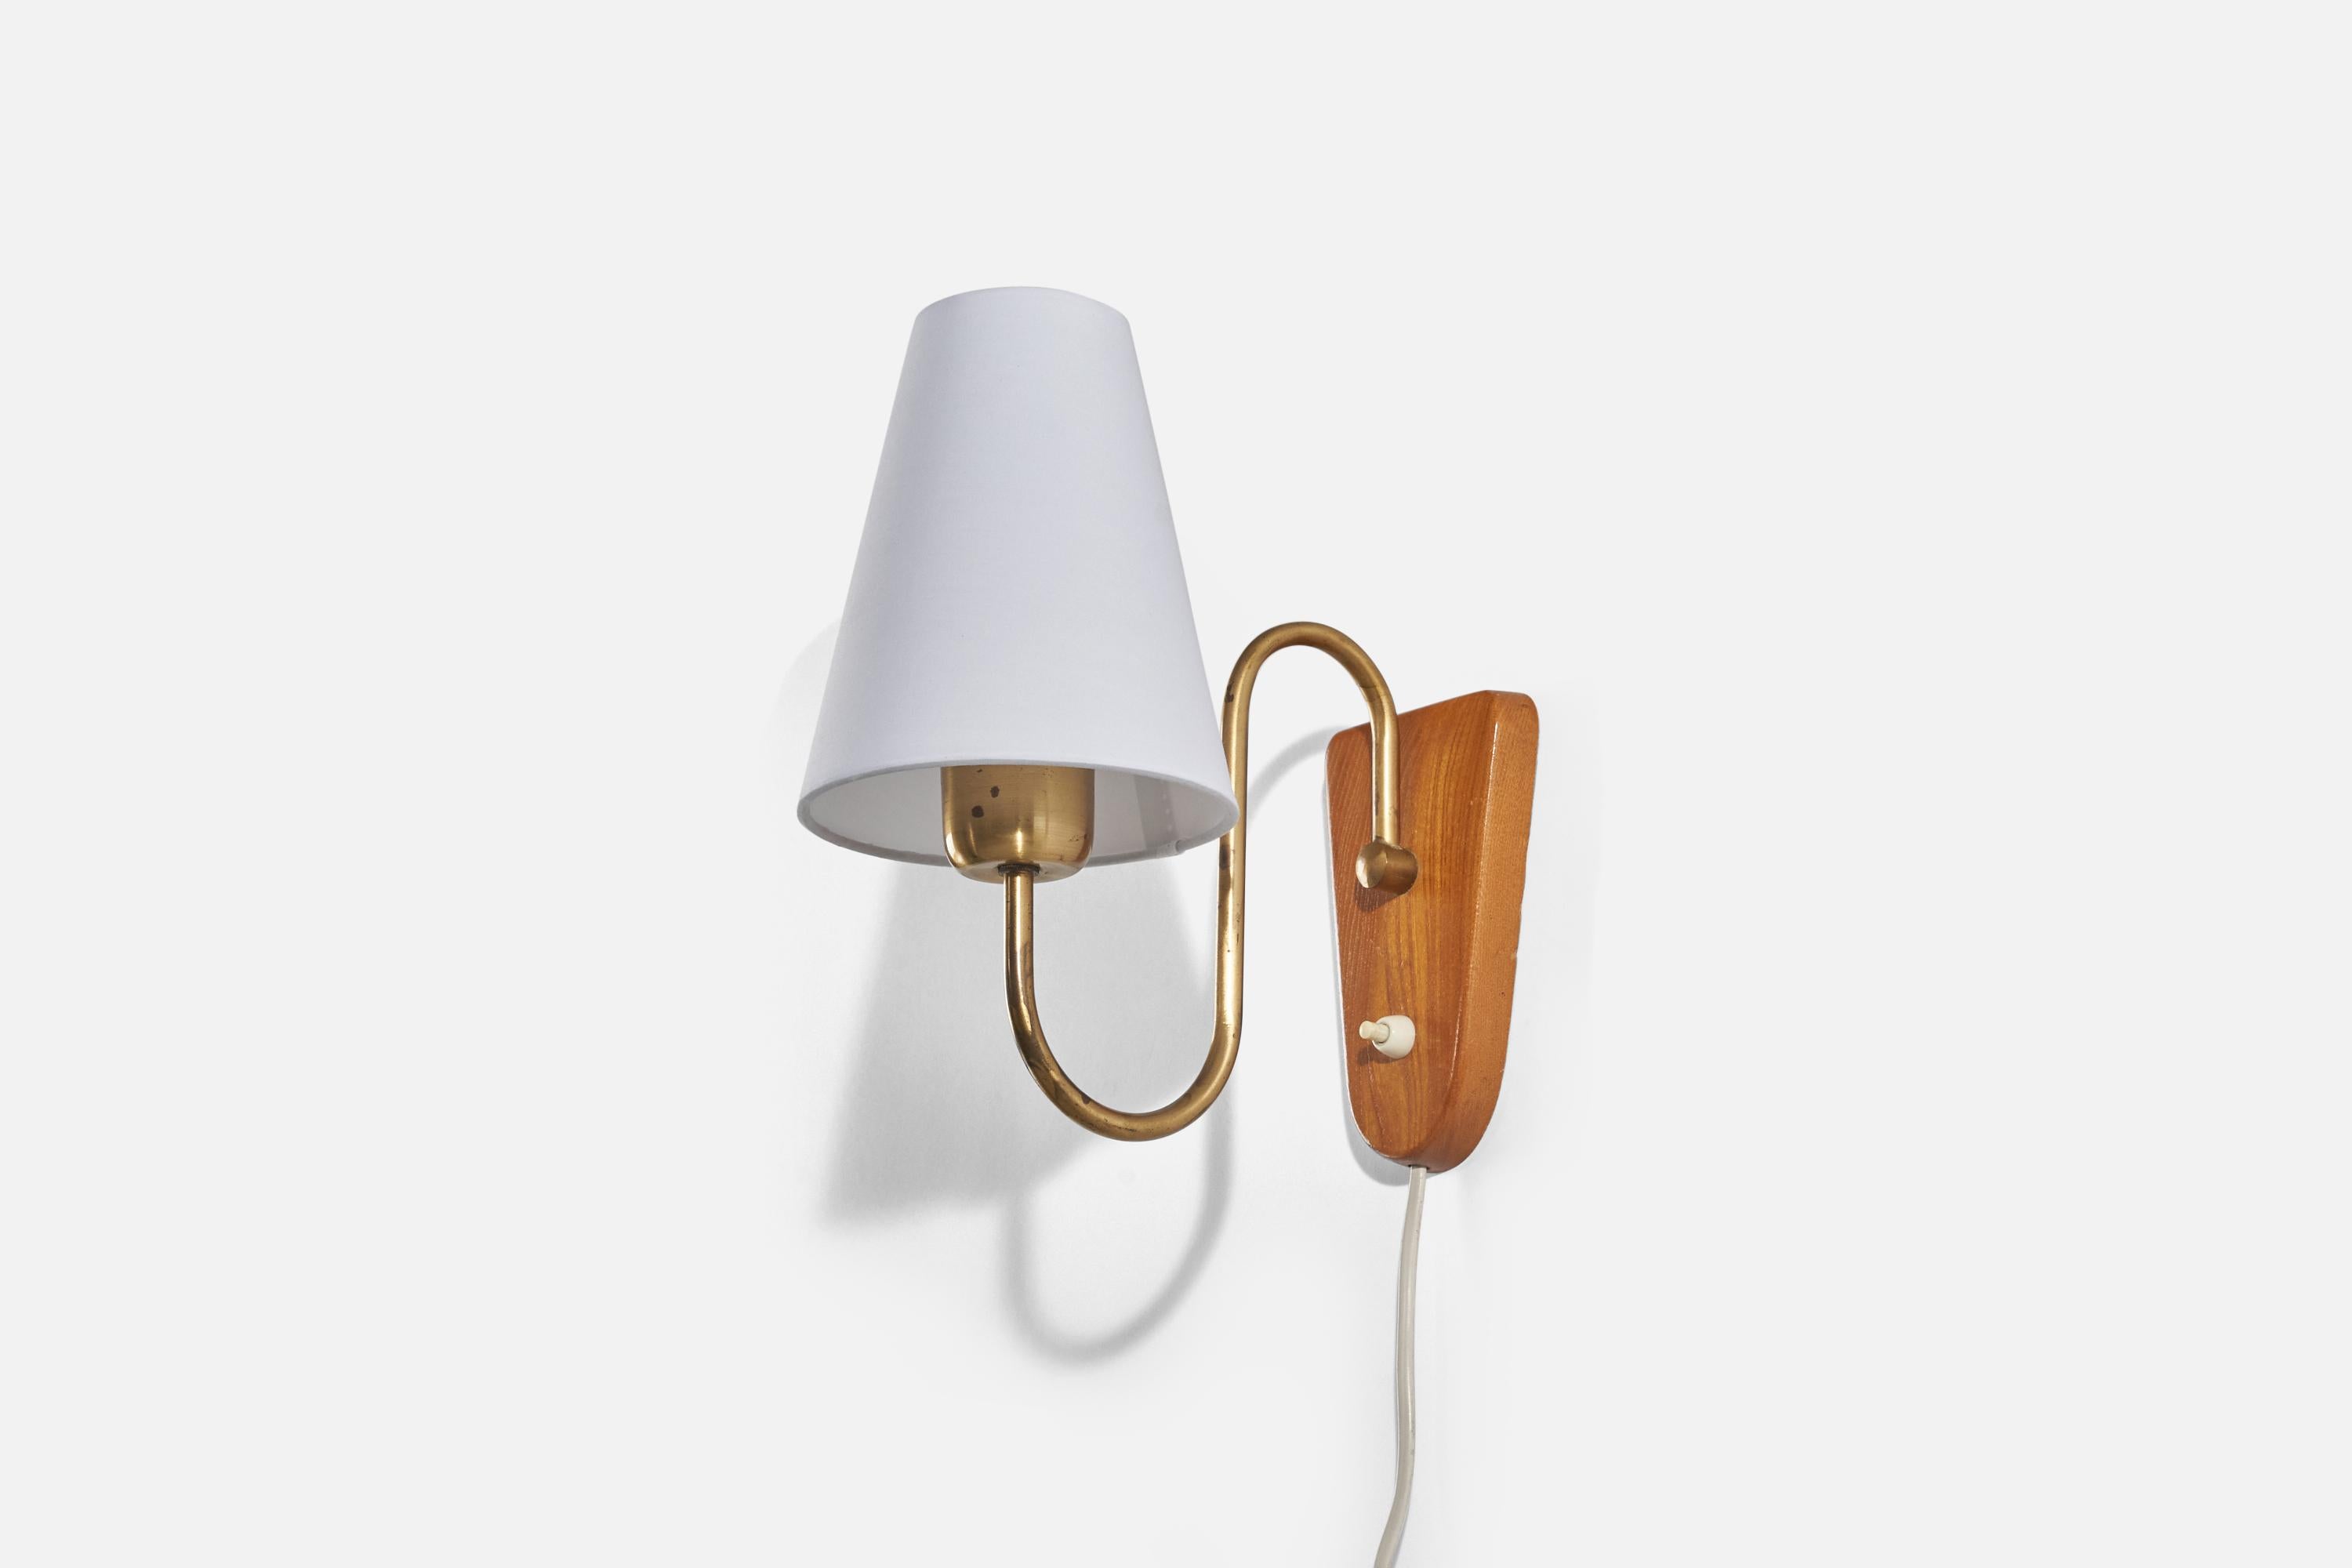 A brass, oak and fabric sconce/ wall light designed and produced in Sweden, c. 1950s. 

Sold with lampshade(s). Dimensions stated are of Sconce with Shade(s).

Dimensions of back plate (inches) : 6.37 x 3.74 x 0.74 (Height x Width x